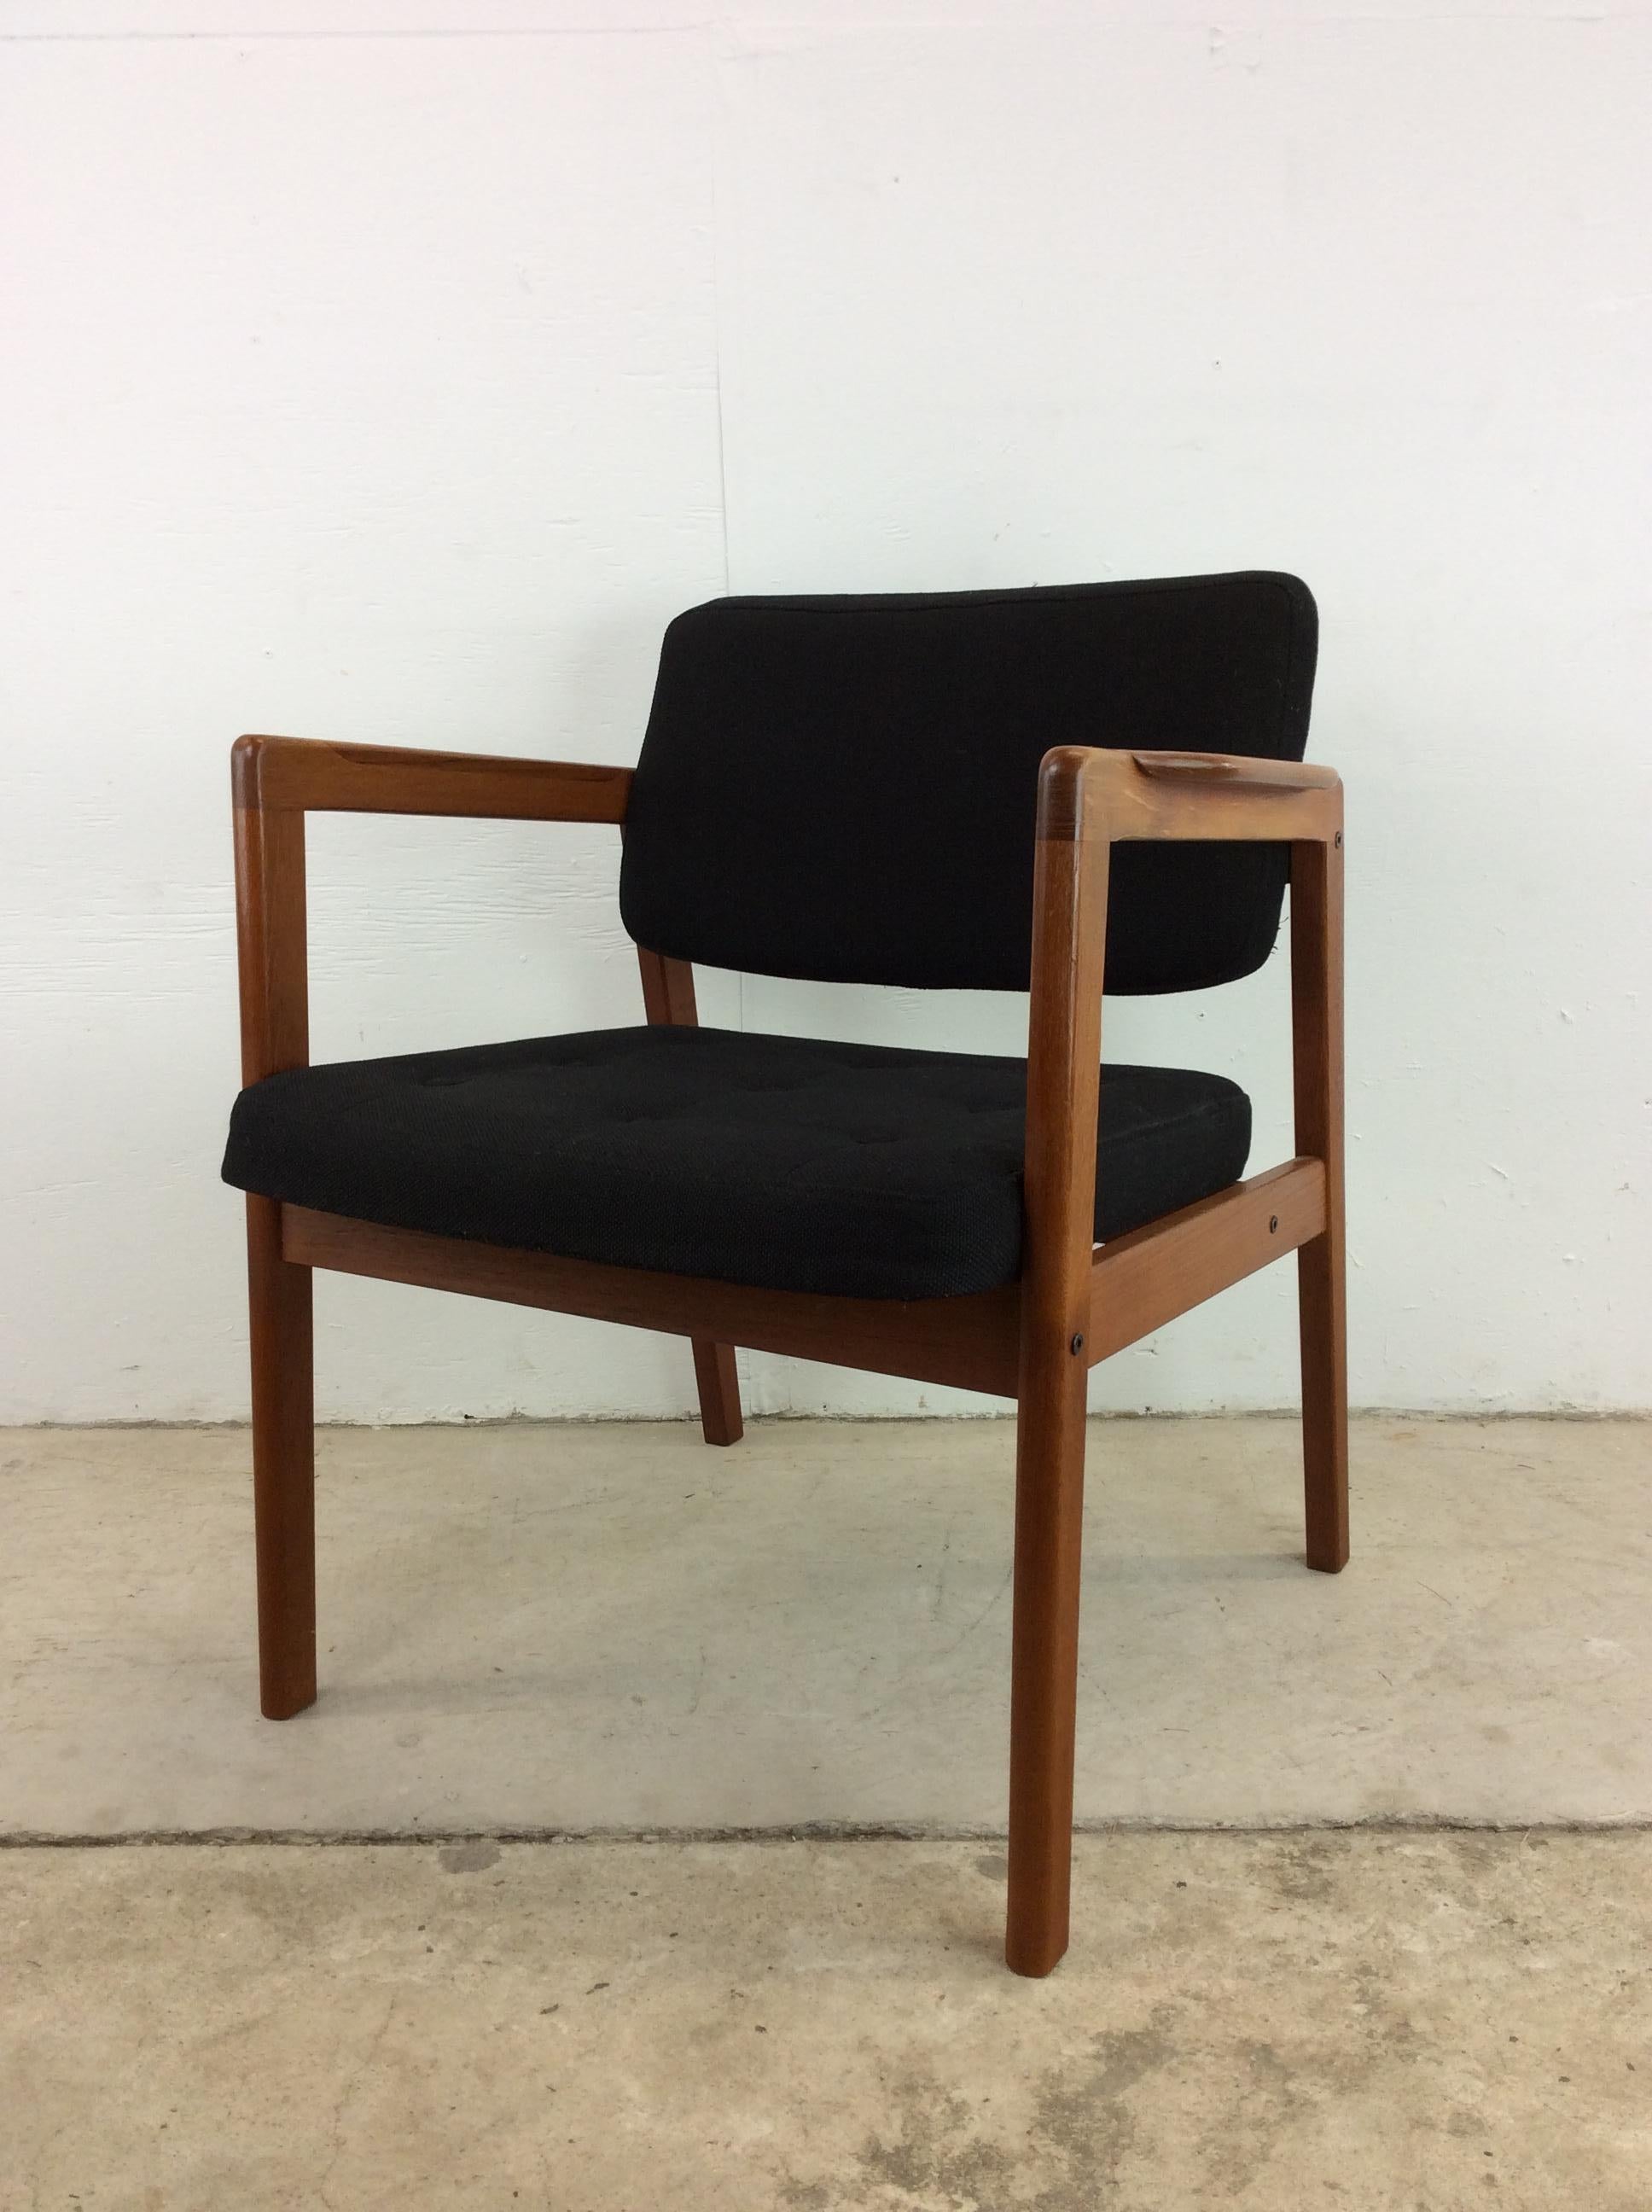 This Danish Modern arm chair features solid teak frame with original finish, vintage black upholstery with tufted seat back, and tall tapered legs.

Complimentary Danish modern office furniture available separately.

Dimensions: 26w 25d 30h 17.25sh